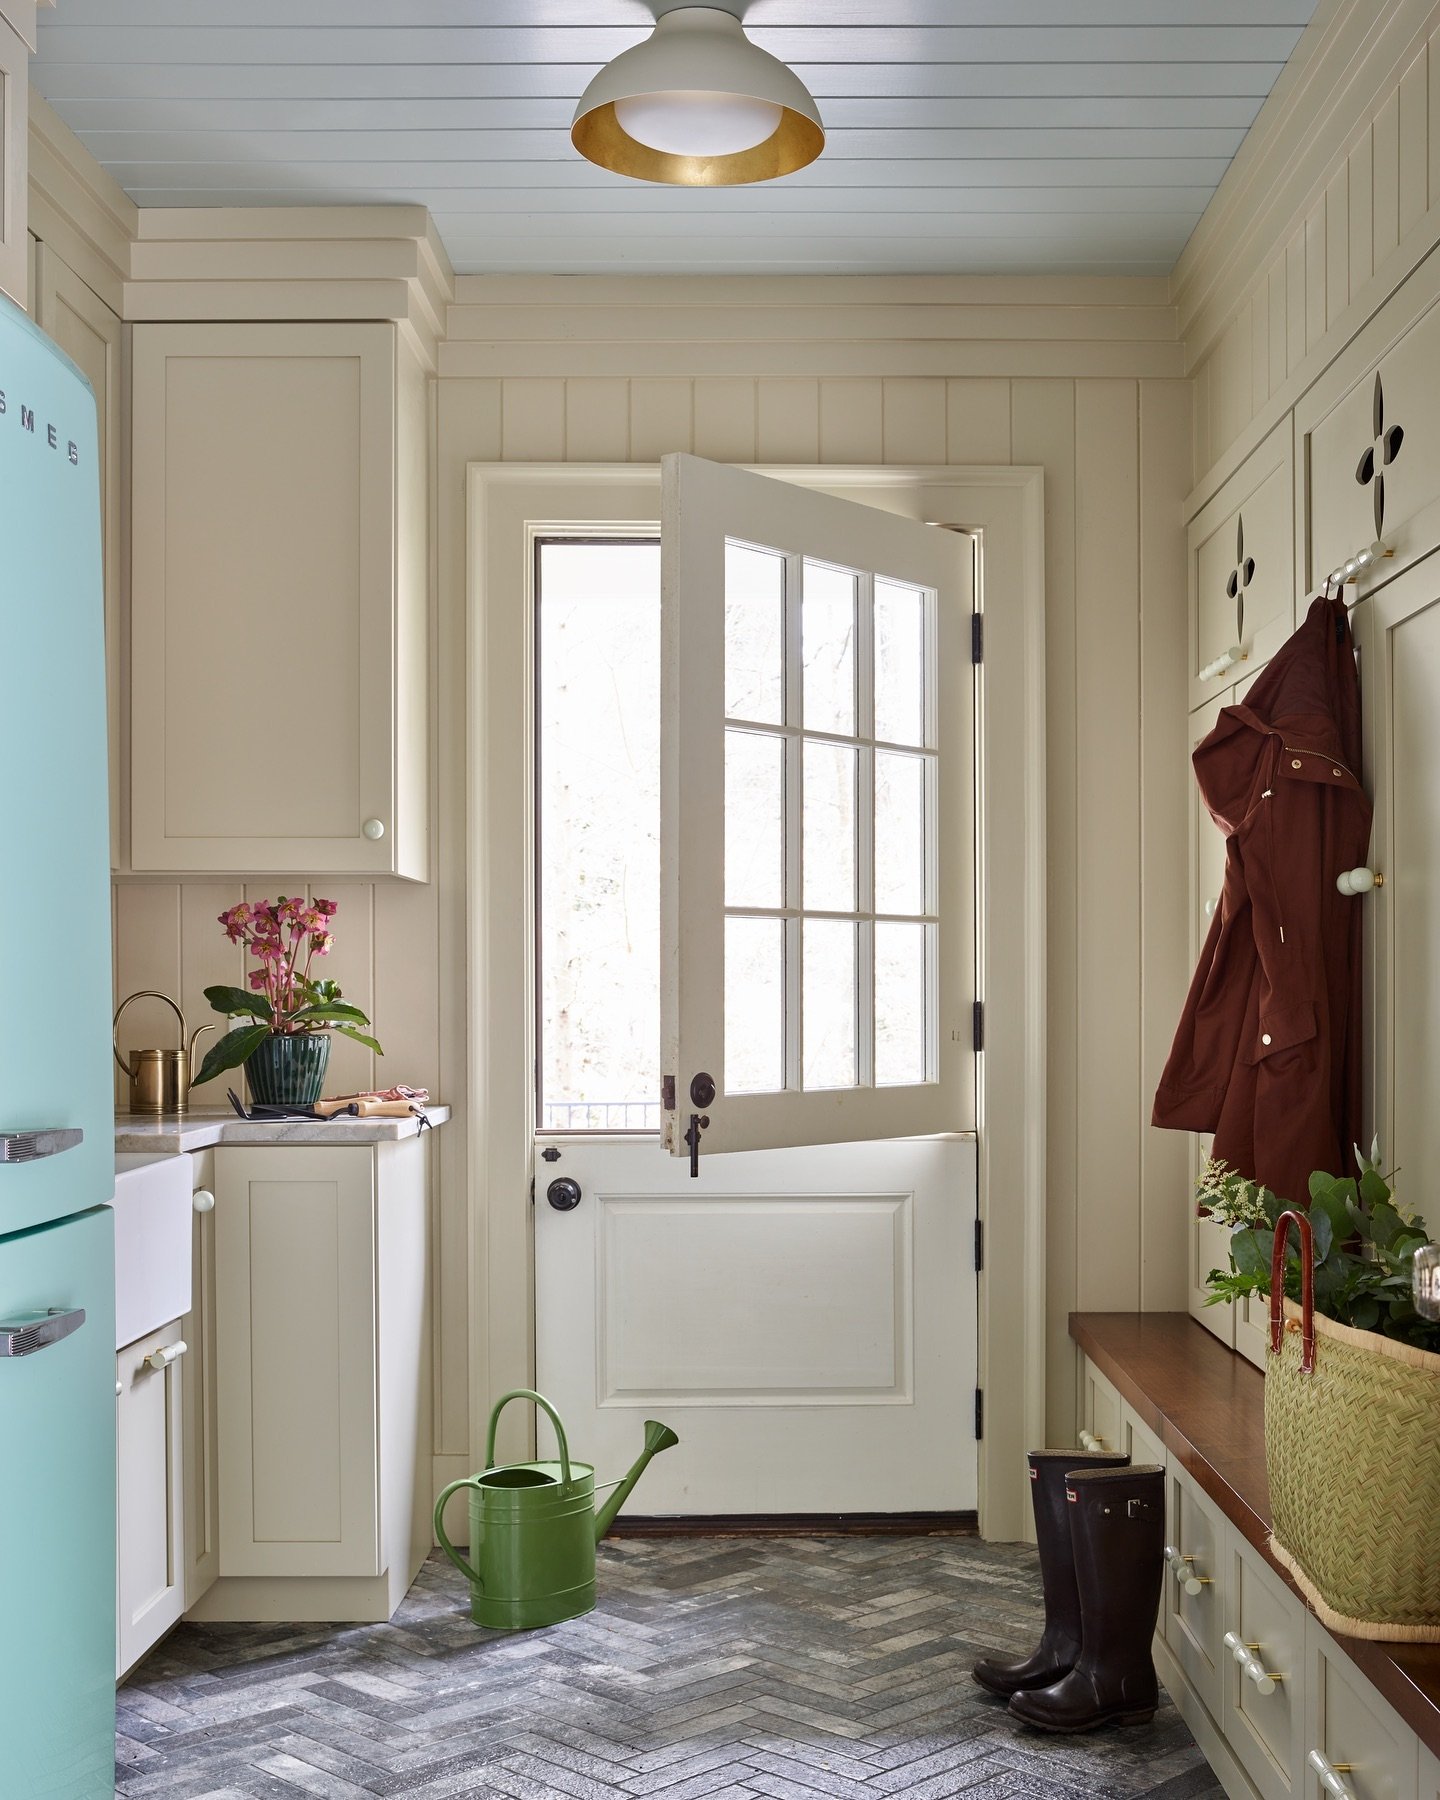 The perfect mudroom doesn't exi&mdash;oh, wait, it does! This springtime space designed by @bradfordlowryinteriors has every detail covered.

#bradfordlowrydesign #atlantadesigner #interiordesign #mudroom